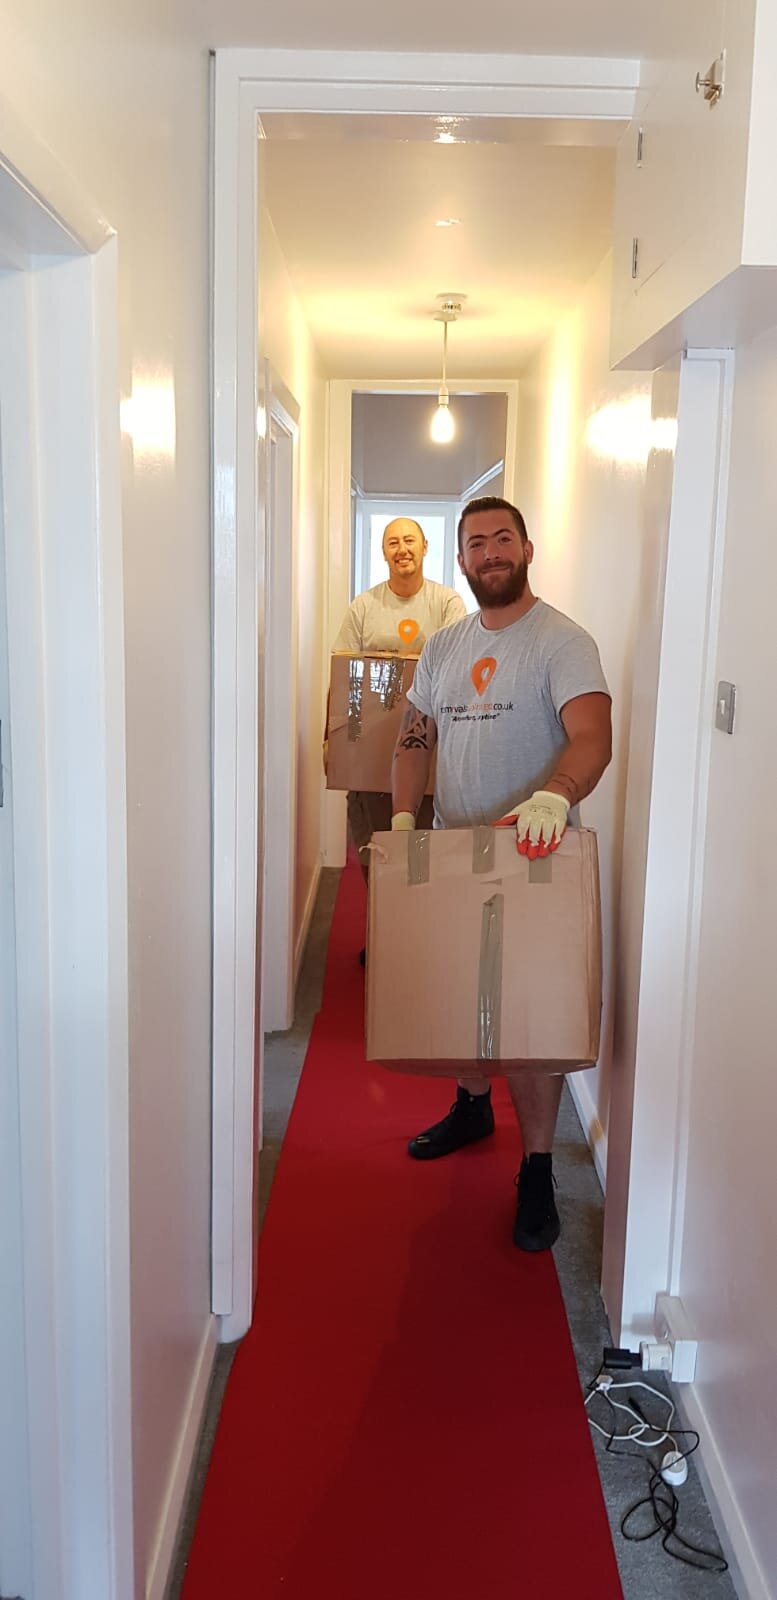 Packing service at Removals Unlimited in Bournemouth.jpg